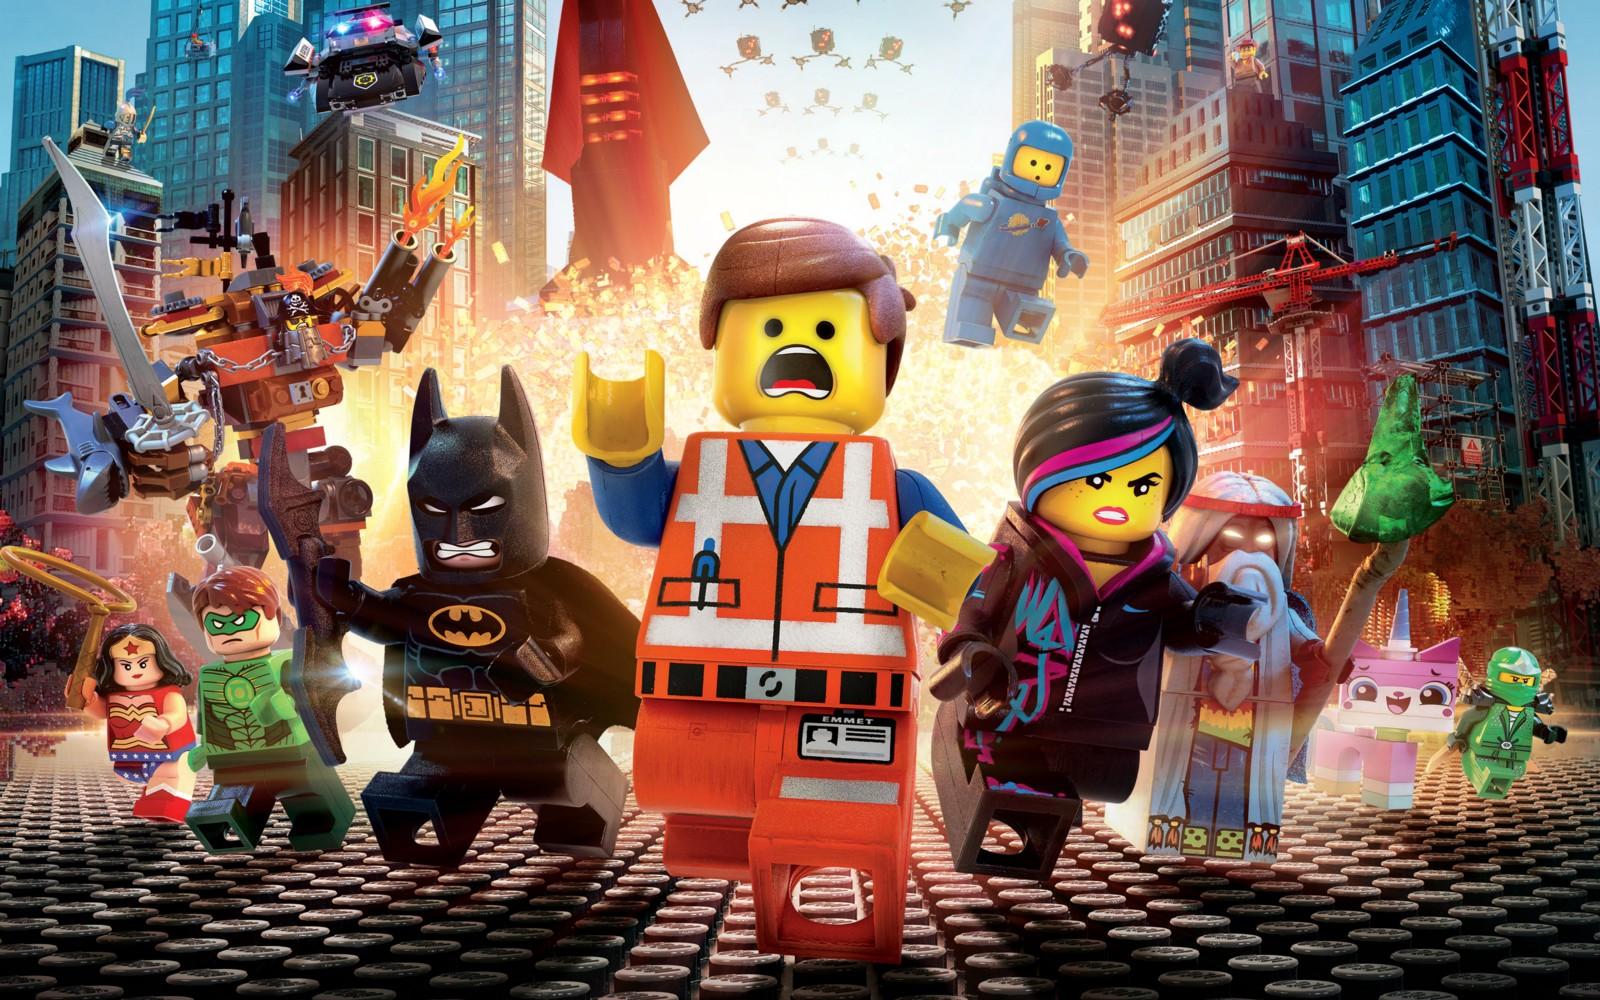 Reasons The LEGO Movie Is the Greatest Branded Content Ever